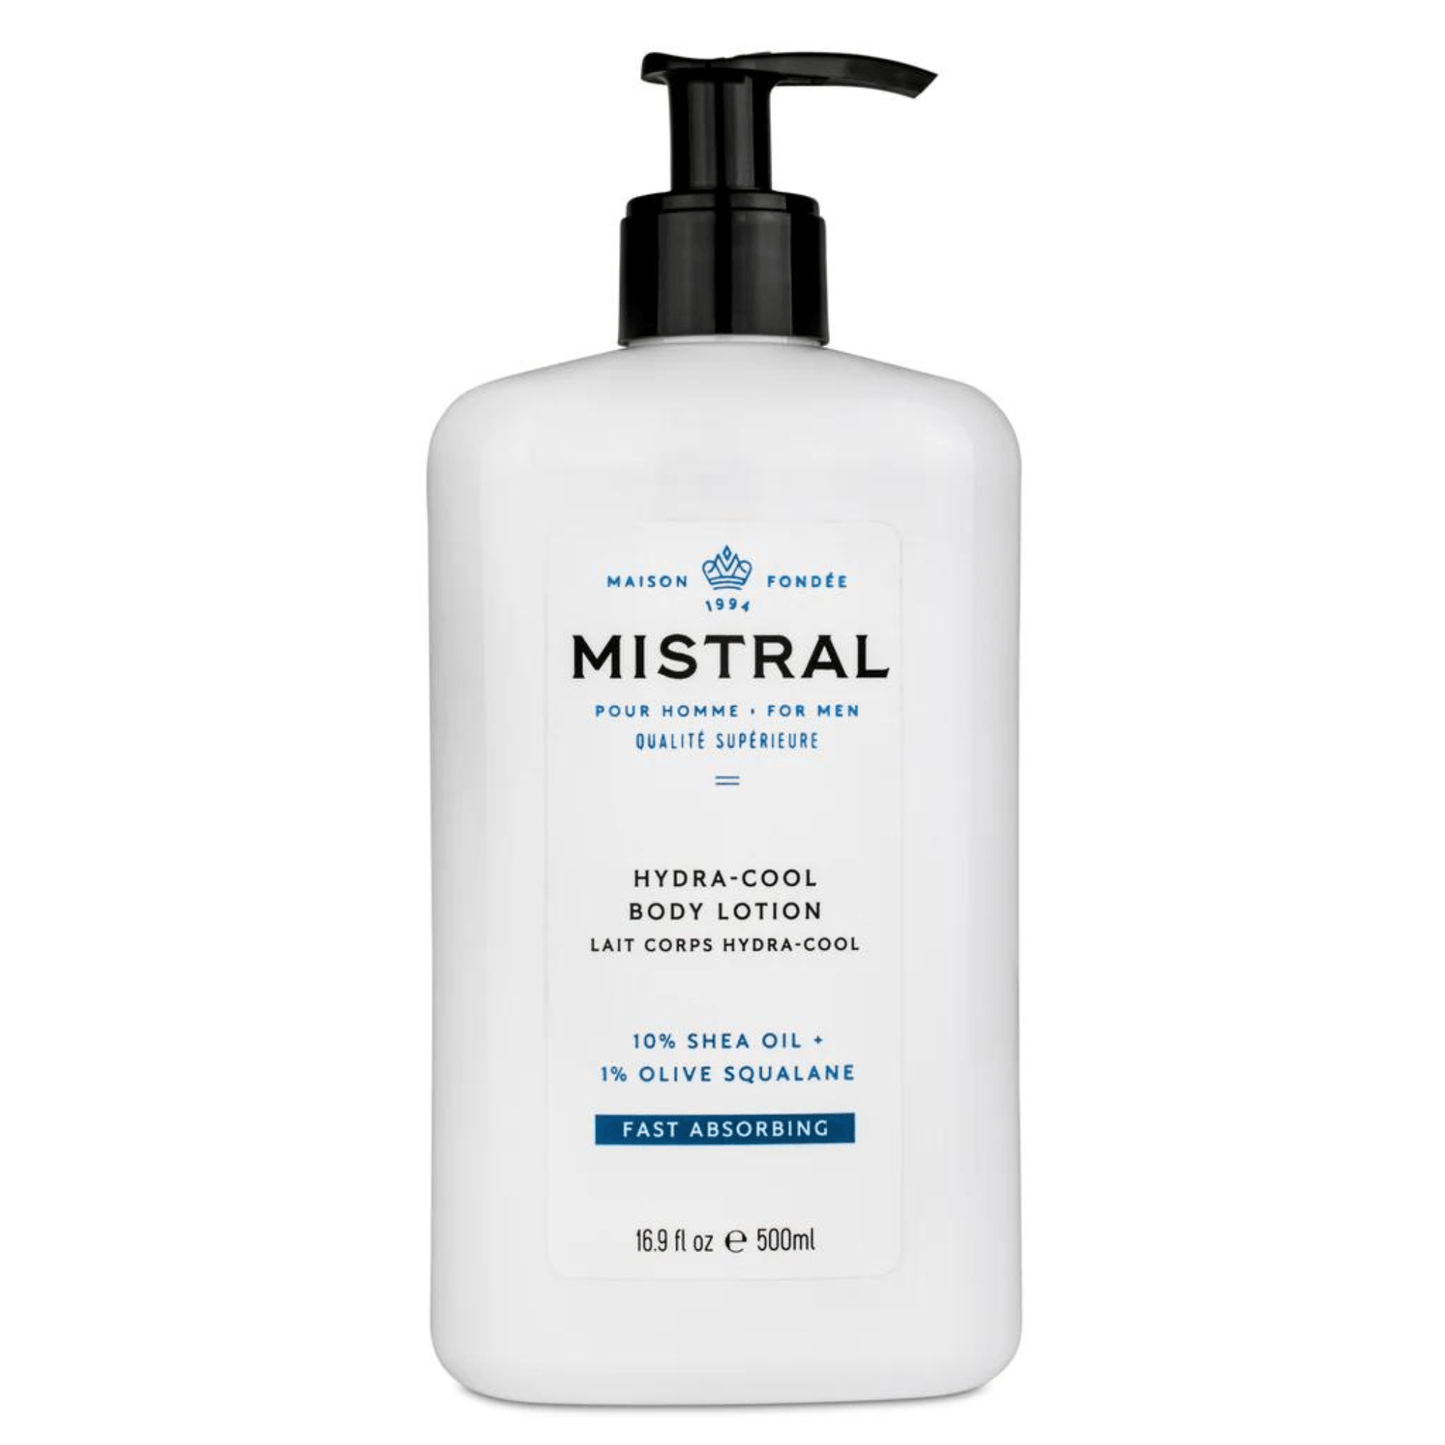 Primary Image of Men's Hydra-Cool Body Lotion